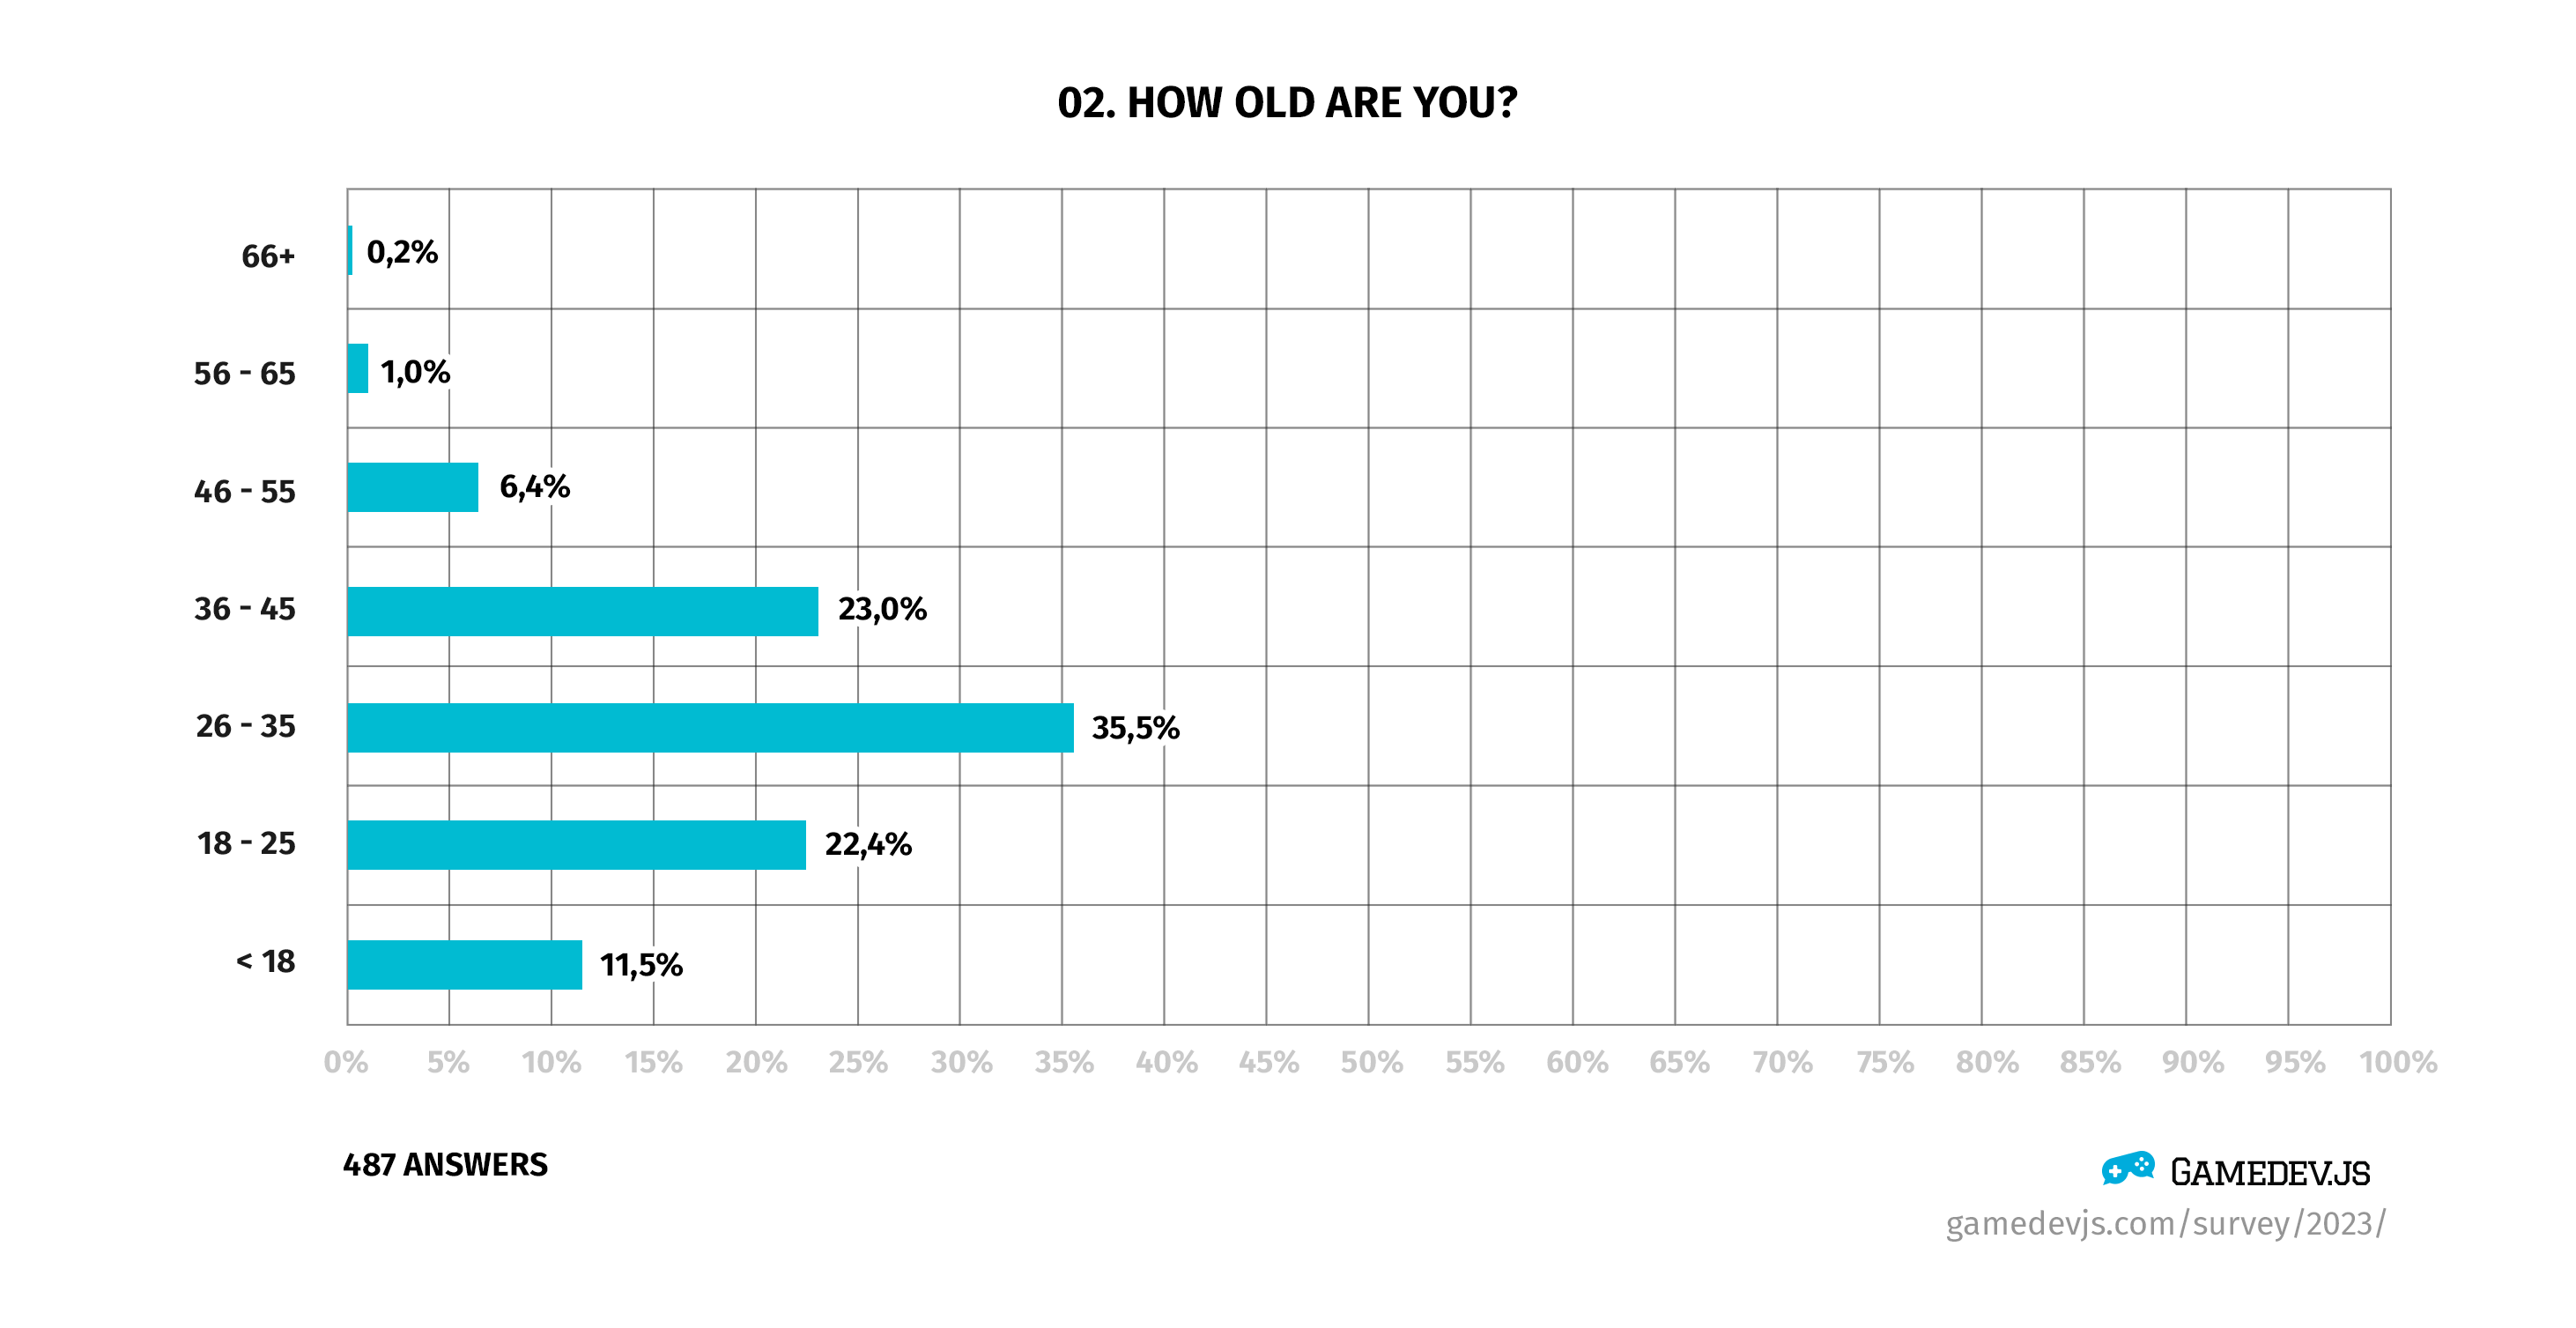 Gamedev.js Survey 2023 - Question #2: How old are you?